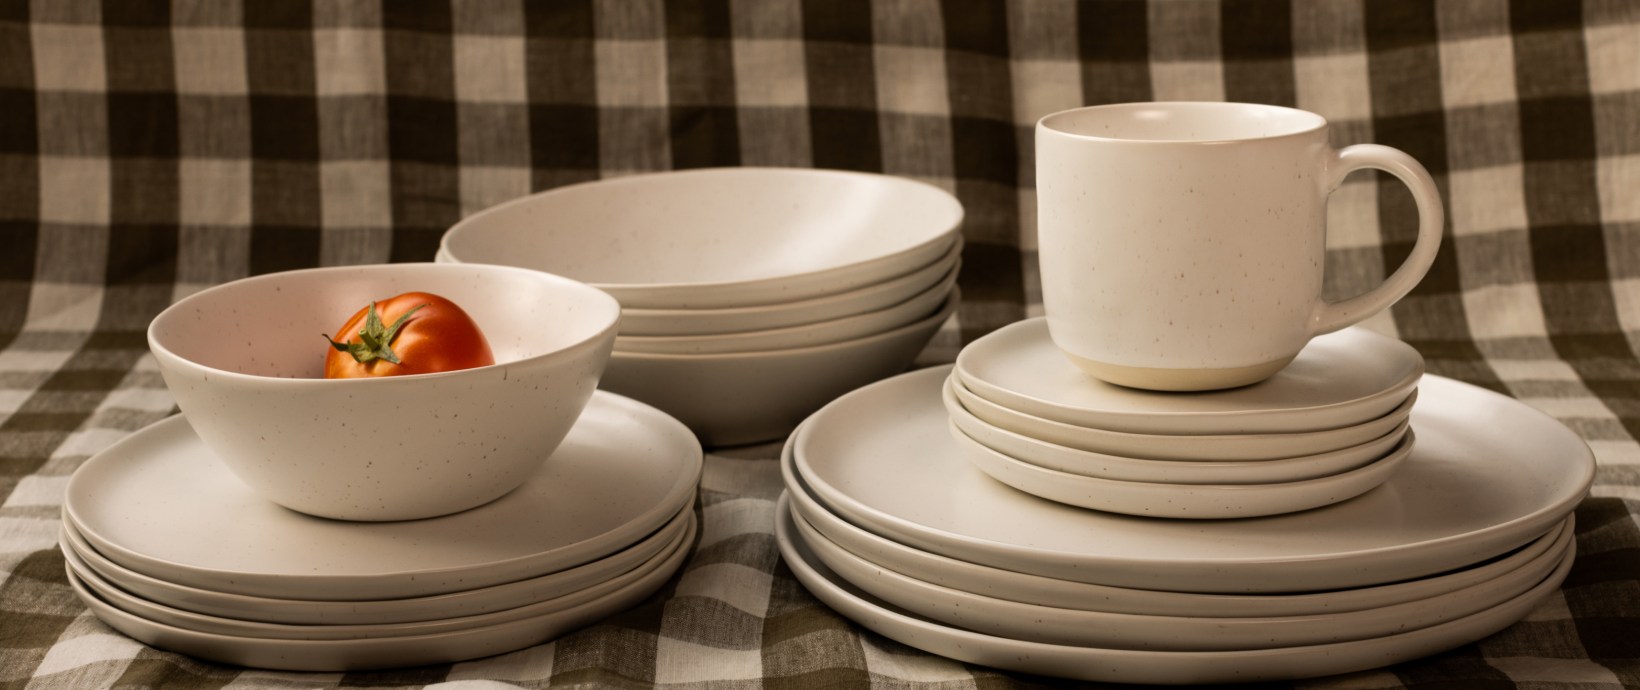 Fable dinnerware collection